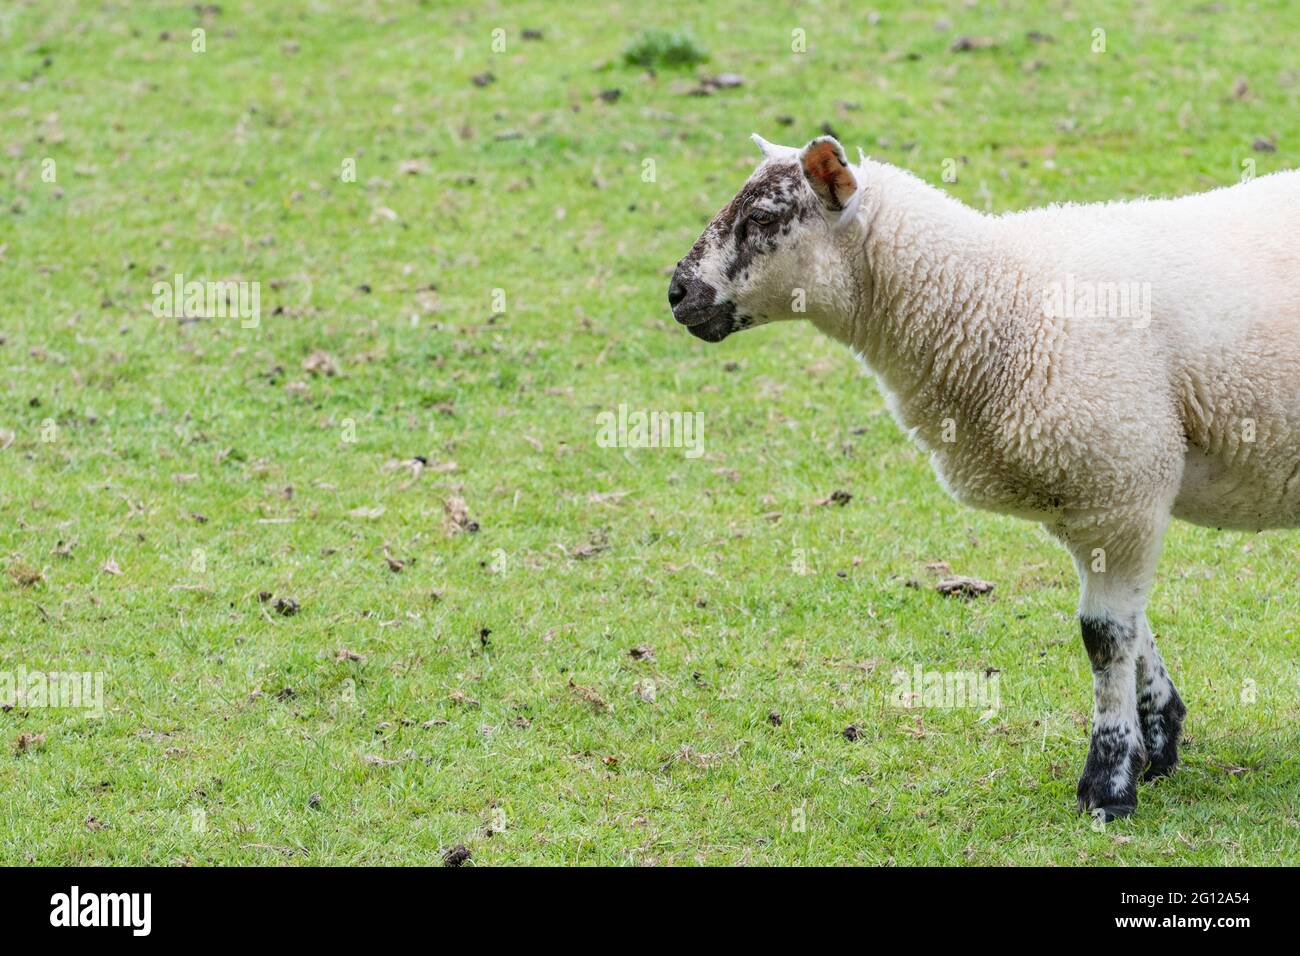 Single solitary sheep in field (under 1 year old) with copy space. For UK agriculture and farming, UK sheep livestock, sheep farming, animal welfare. Stock Photo